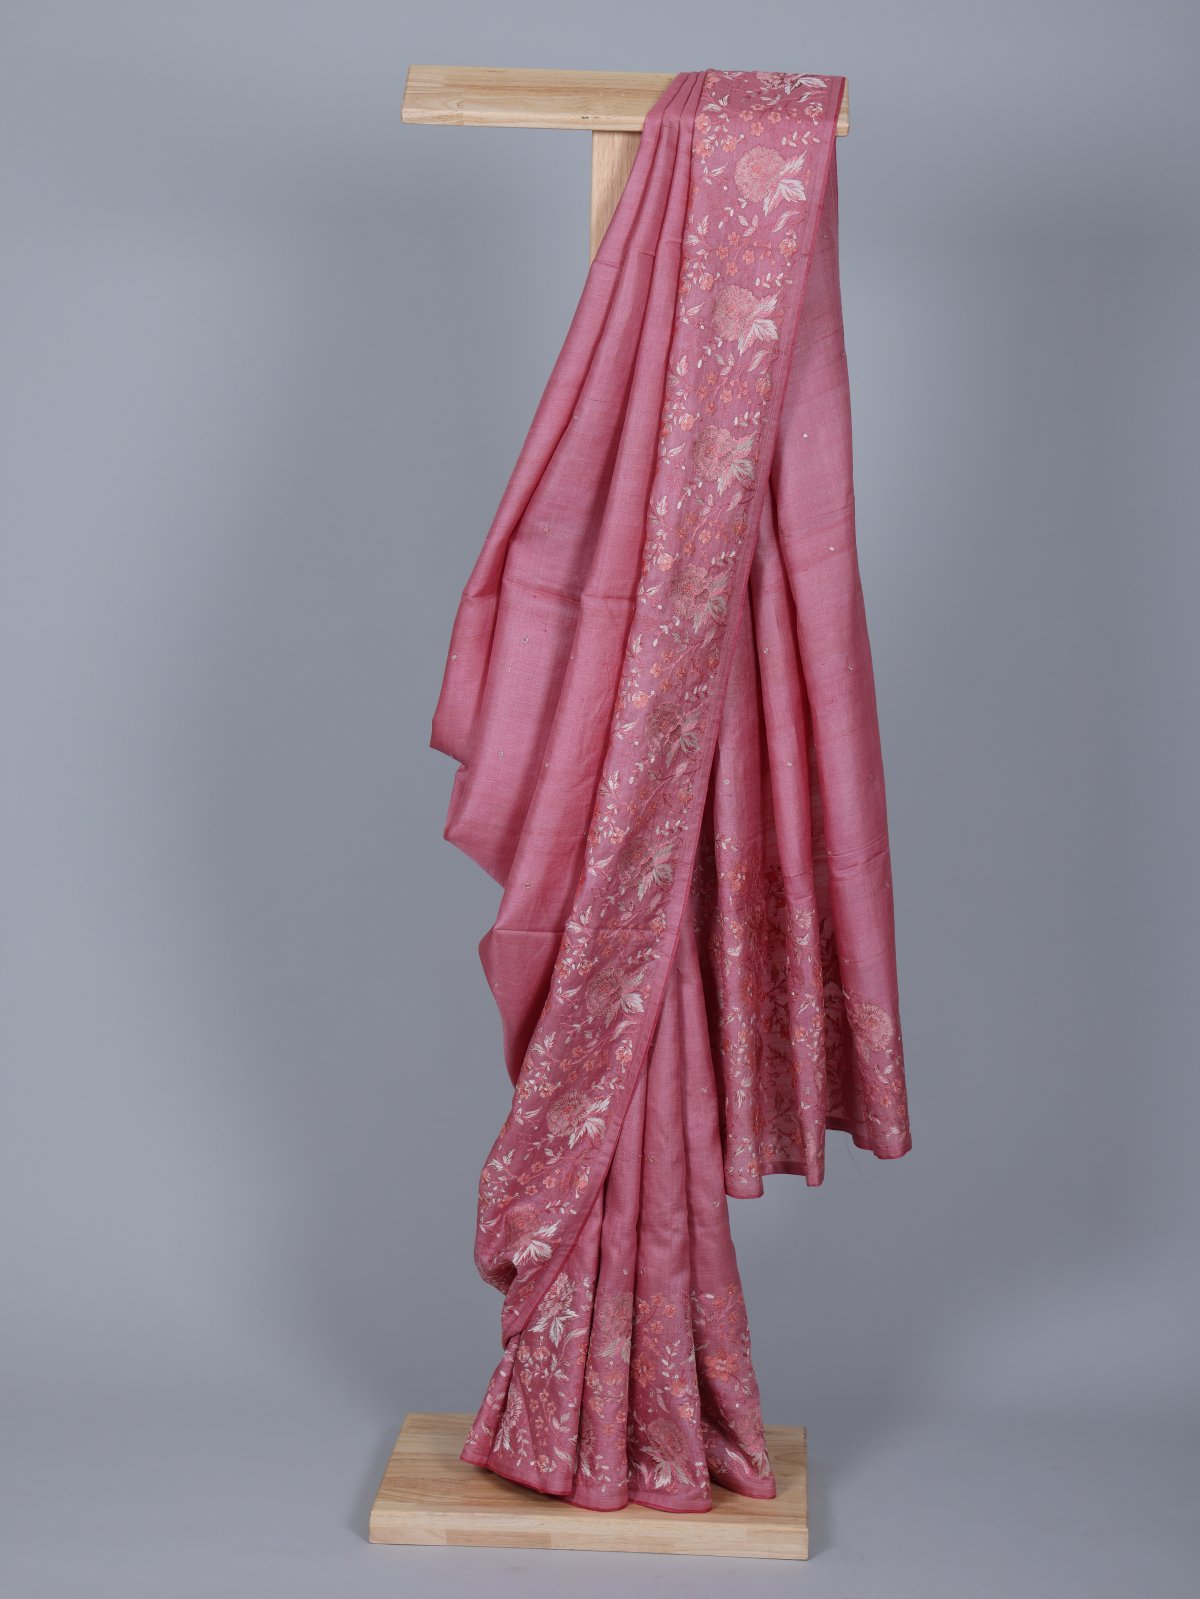 Dusty Pink Tussar Silk Saree with Floral Embroidery Border